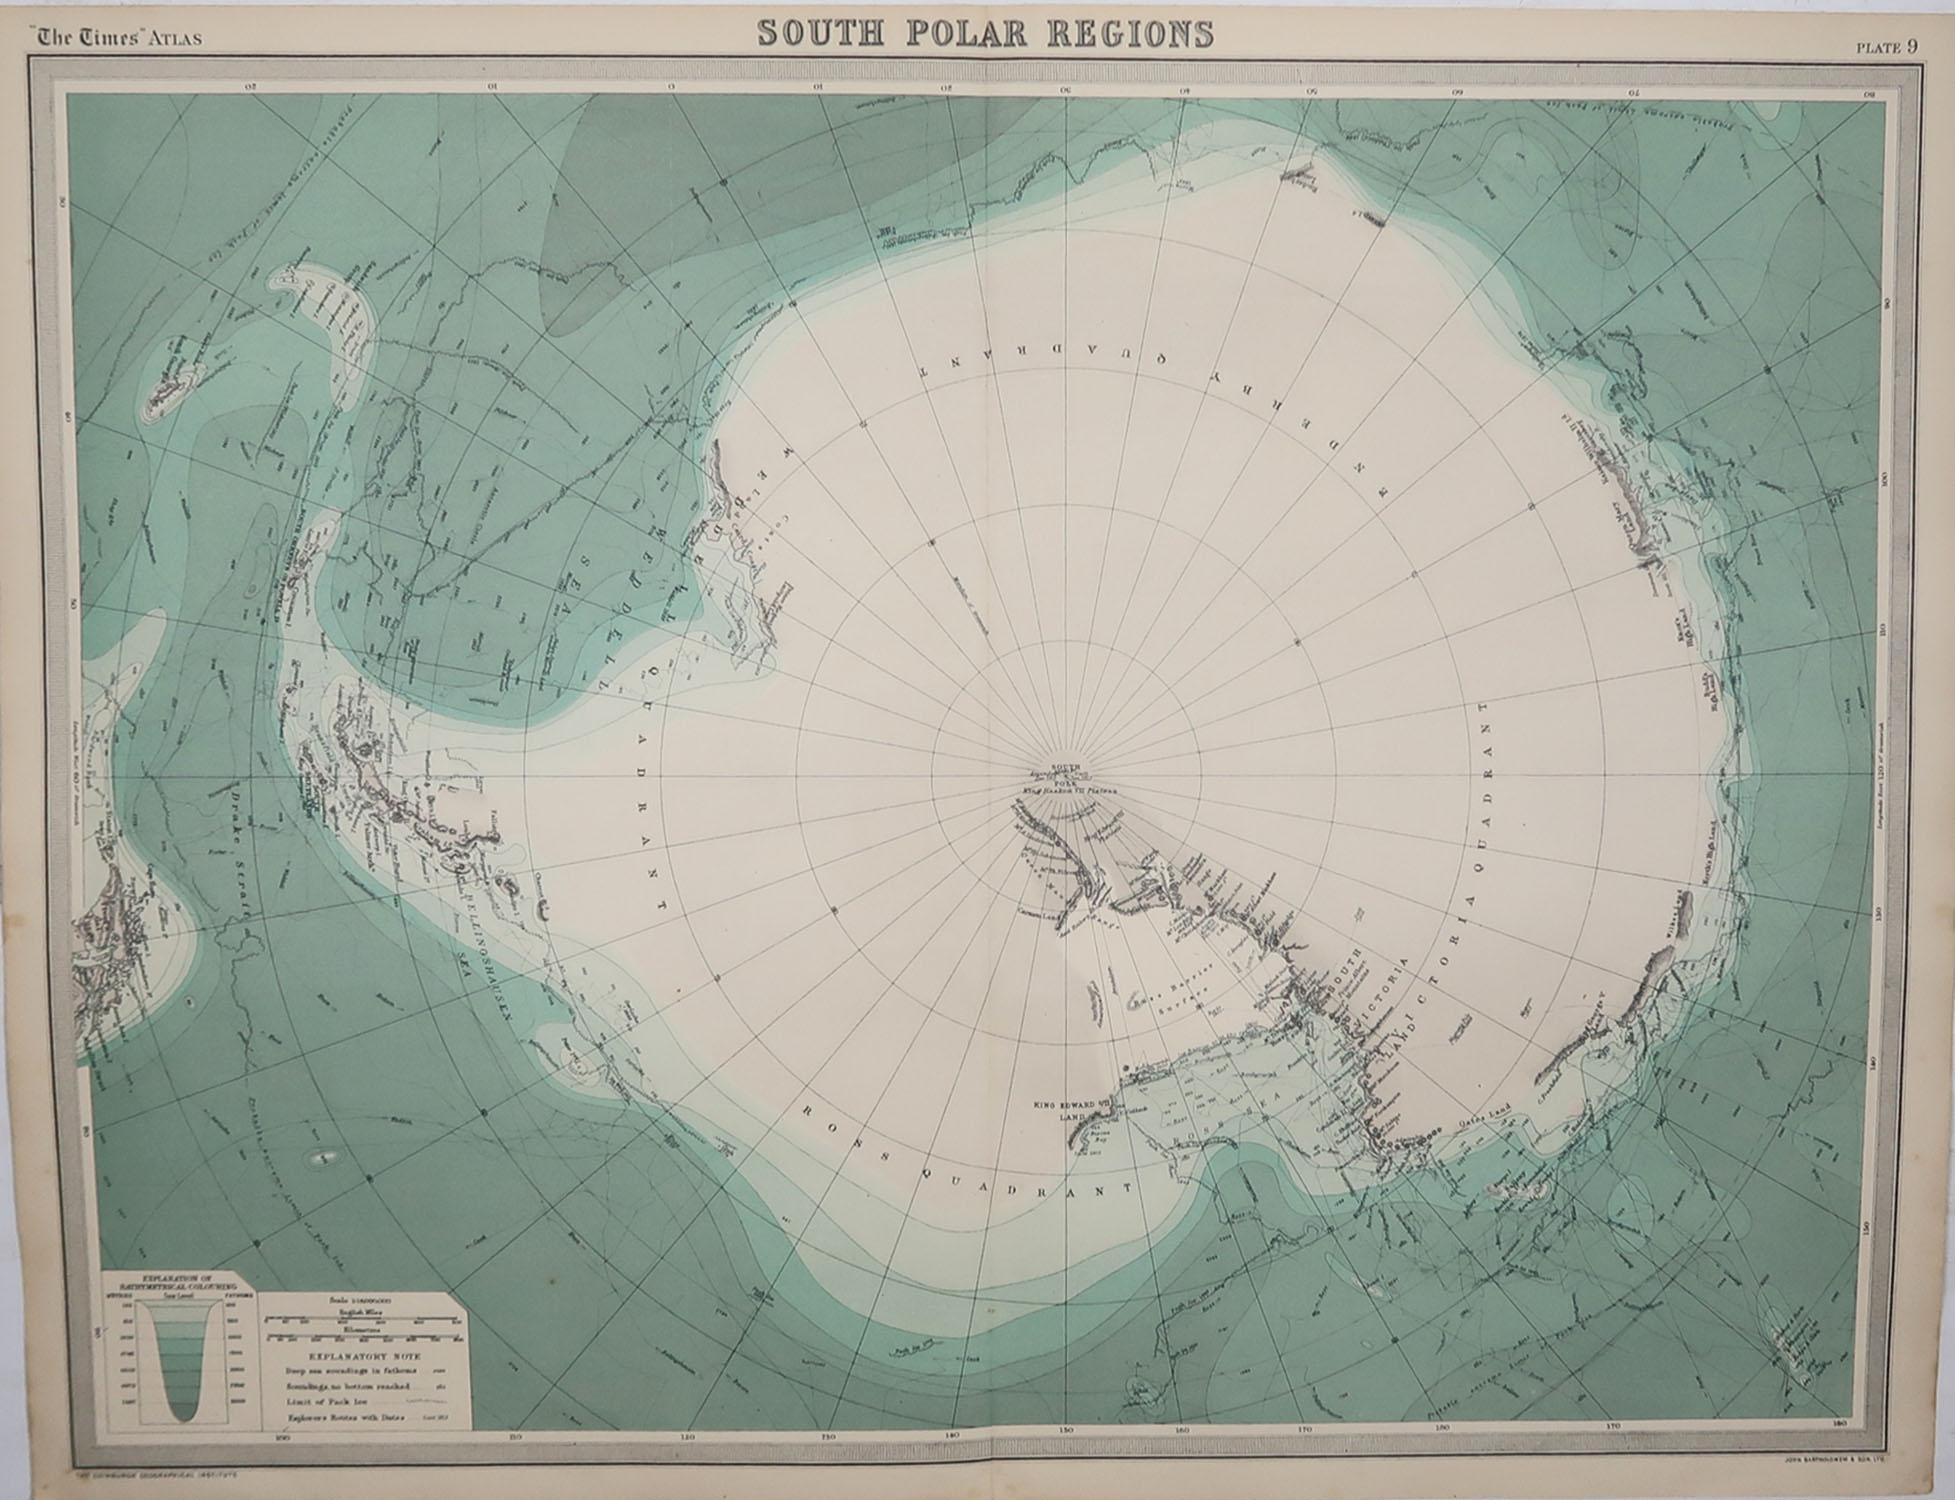 Great maps of The South Pole

Unframed

Original color

By John Bartholomew and Co. Edinburgh Geographical Institute

Published, circa 1920

Free shipping.
  